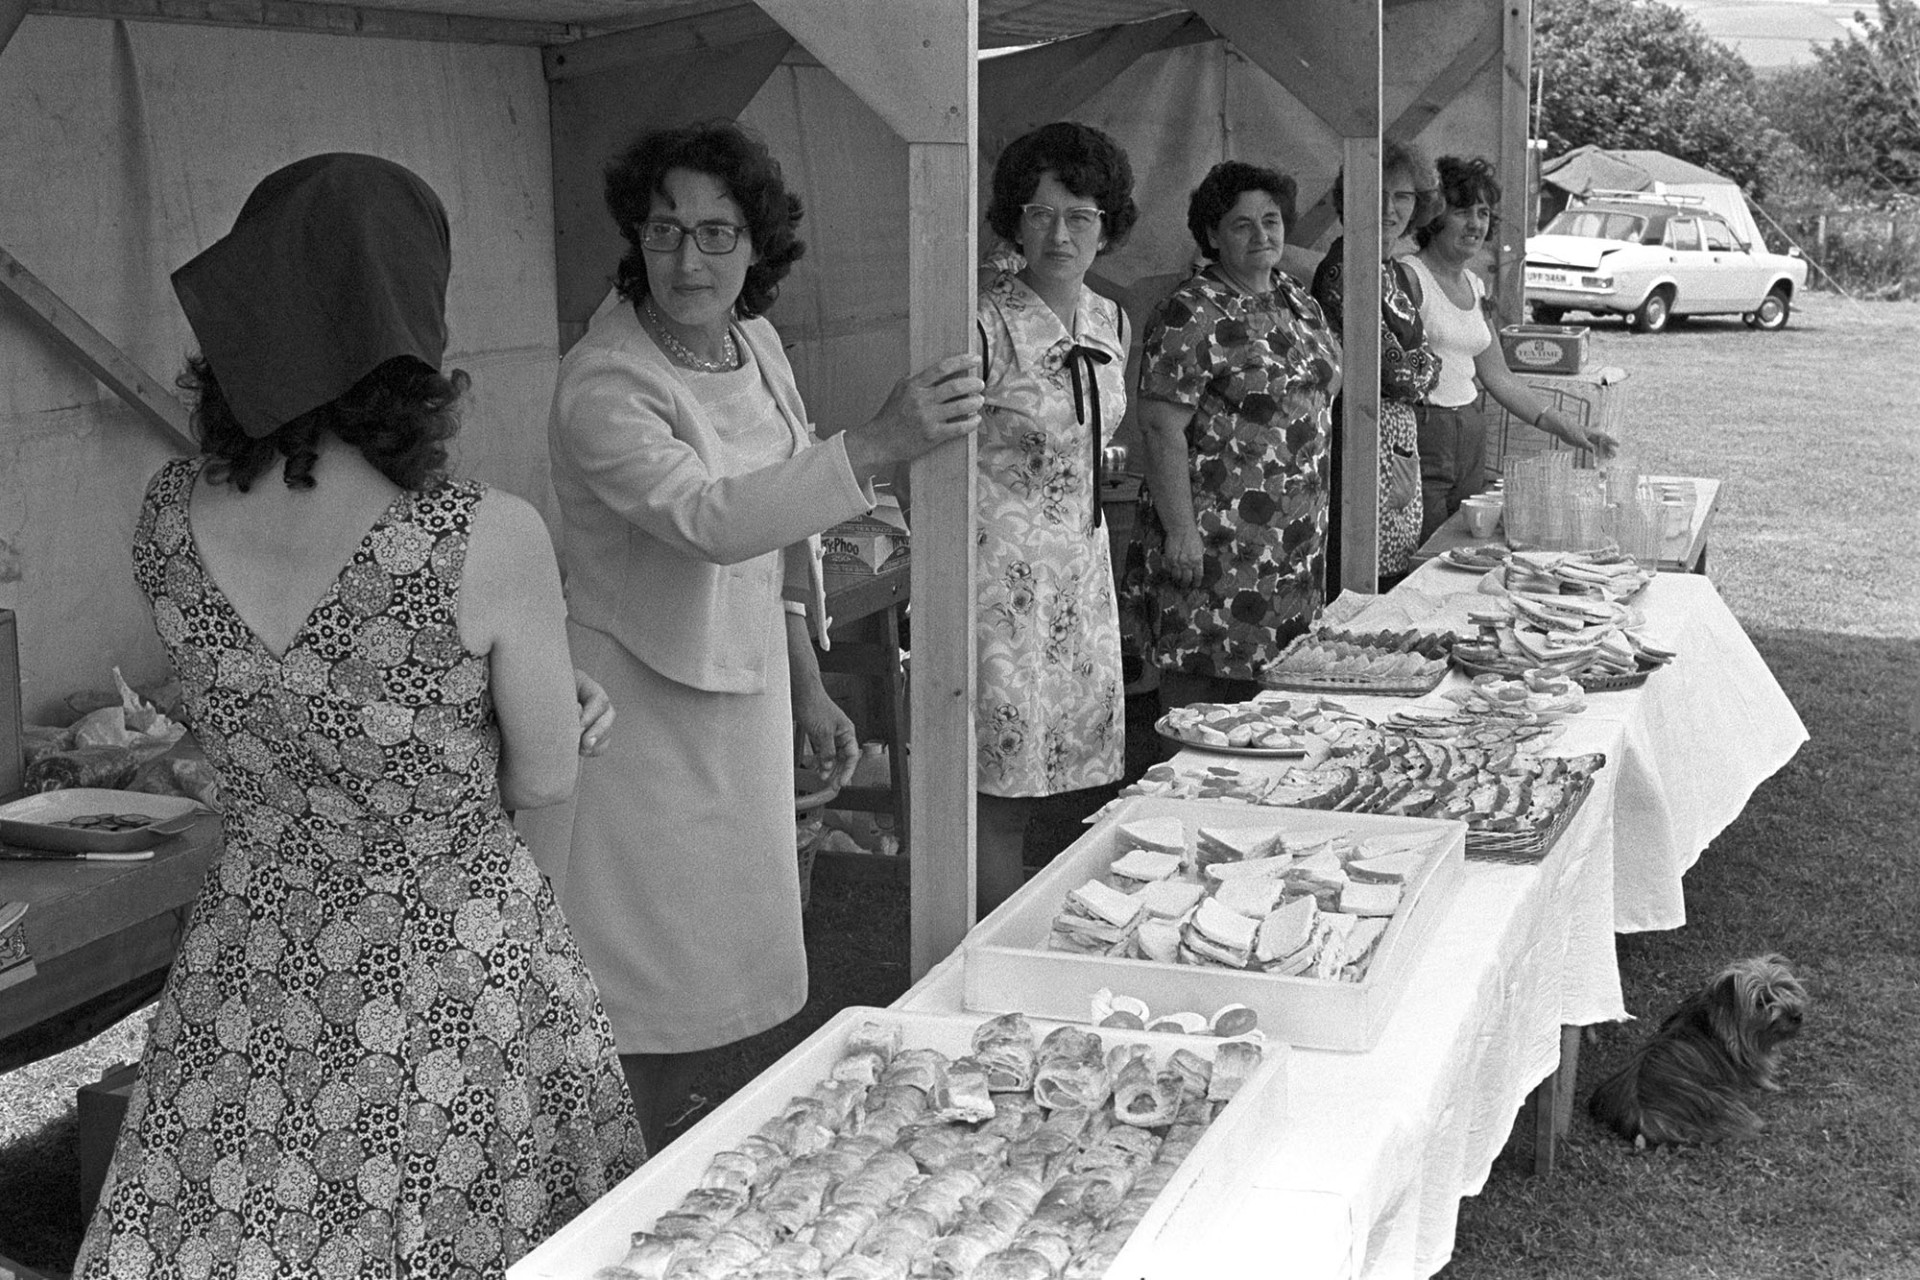 Women at cake stall at fete. 
[Six women at a food and refreshments stall, including sausage rolls and sandwiches, at the village fete in Atherington, with a small dog by the table.]